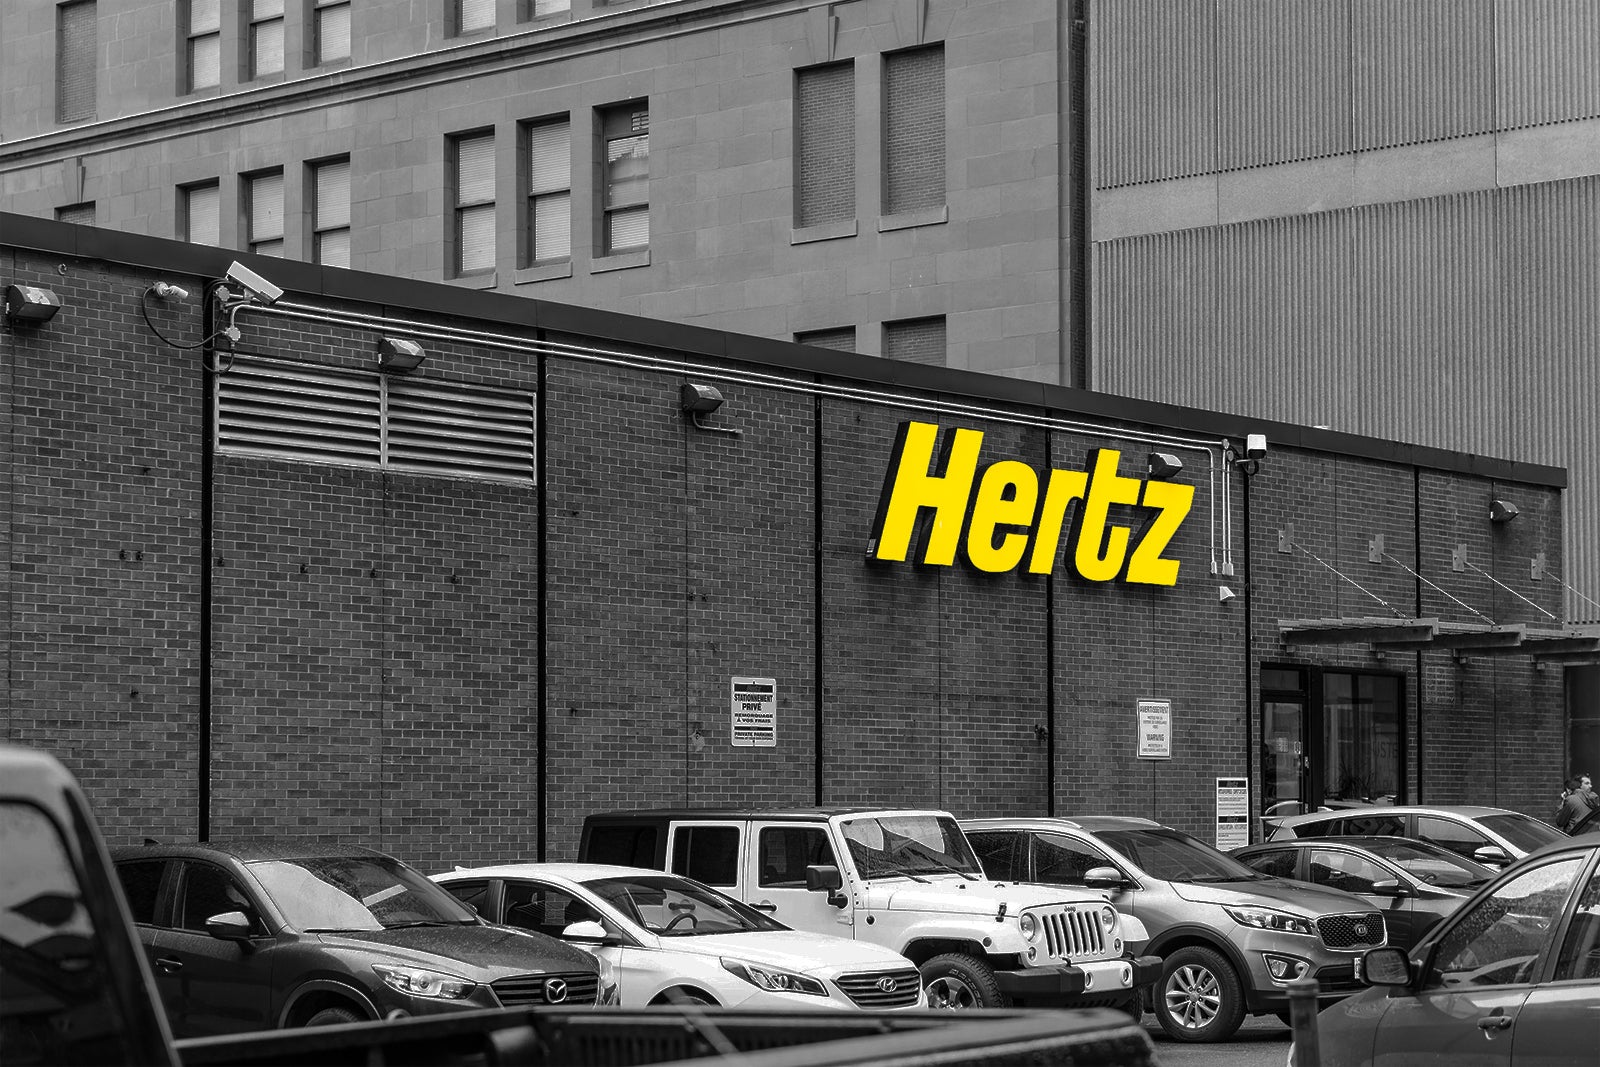 Hertz storefront with cars parked outside